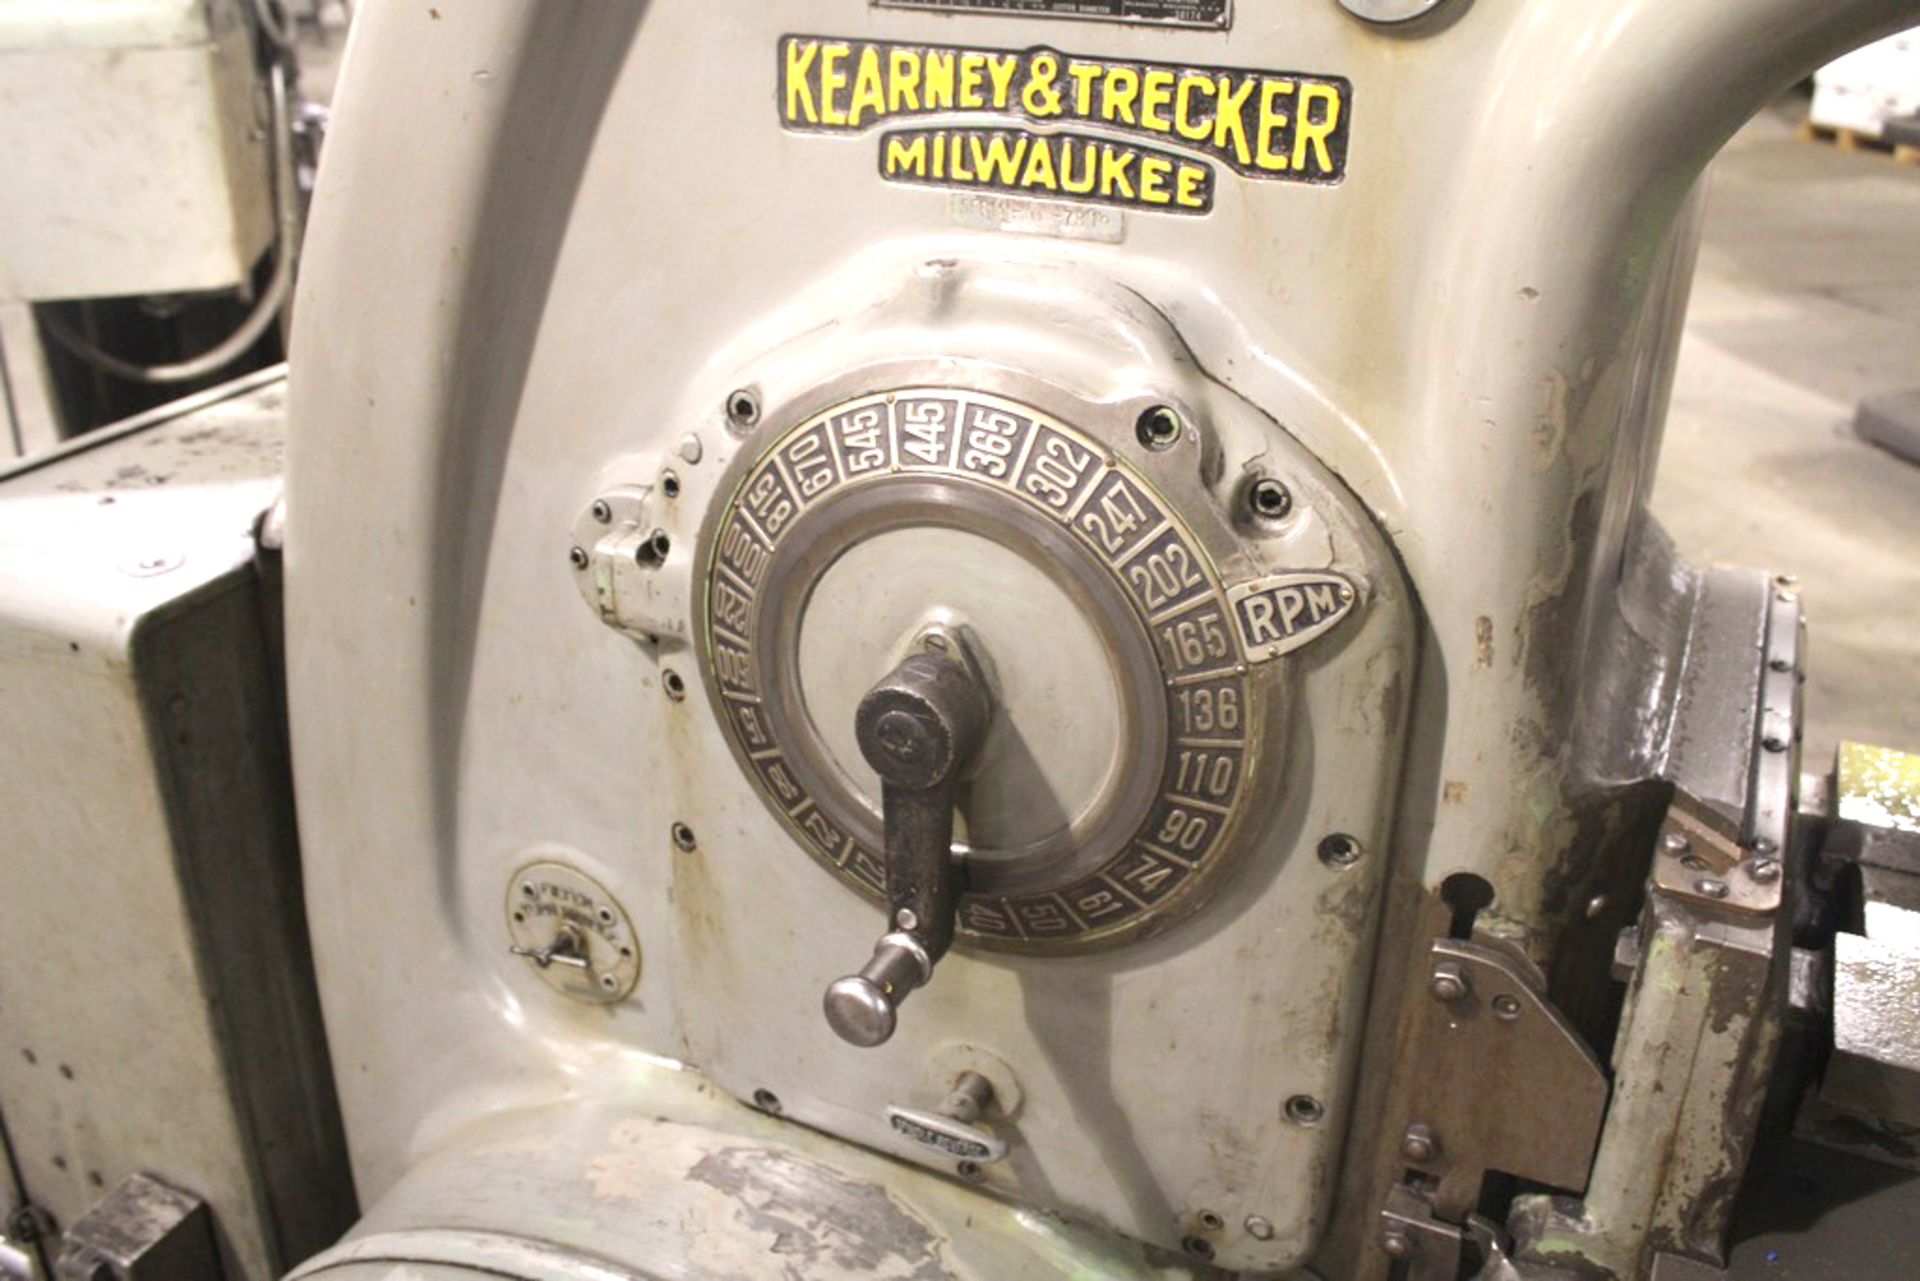 KEARNEY & TRECKER MODEL 15HP-3CK VERTICAL MILL, S/N 6-7819 , 15”X64” TABLE, 1500 RPM SPINDLE - Image 4 of 6